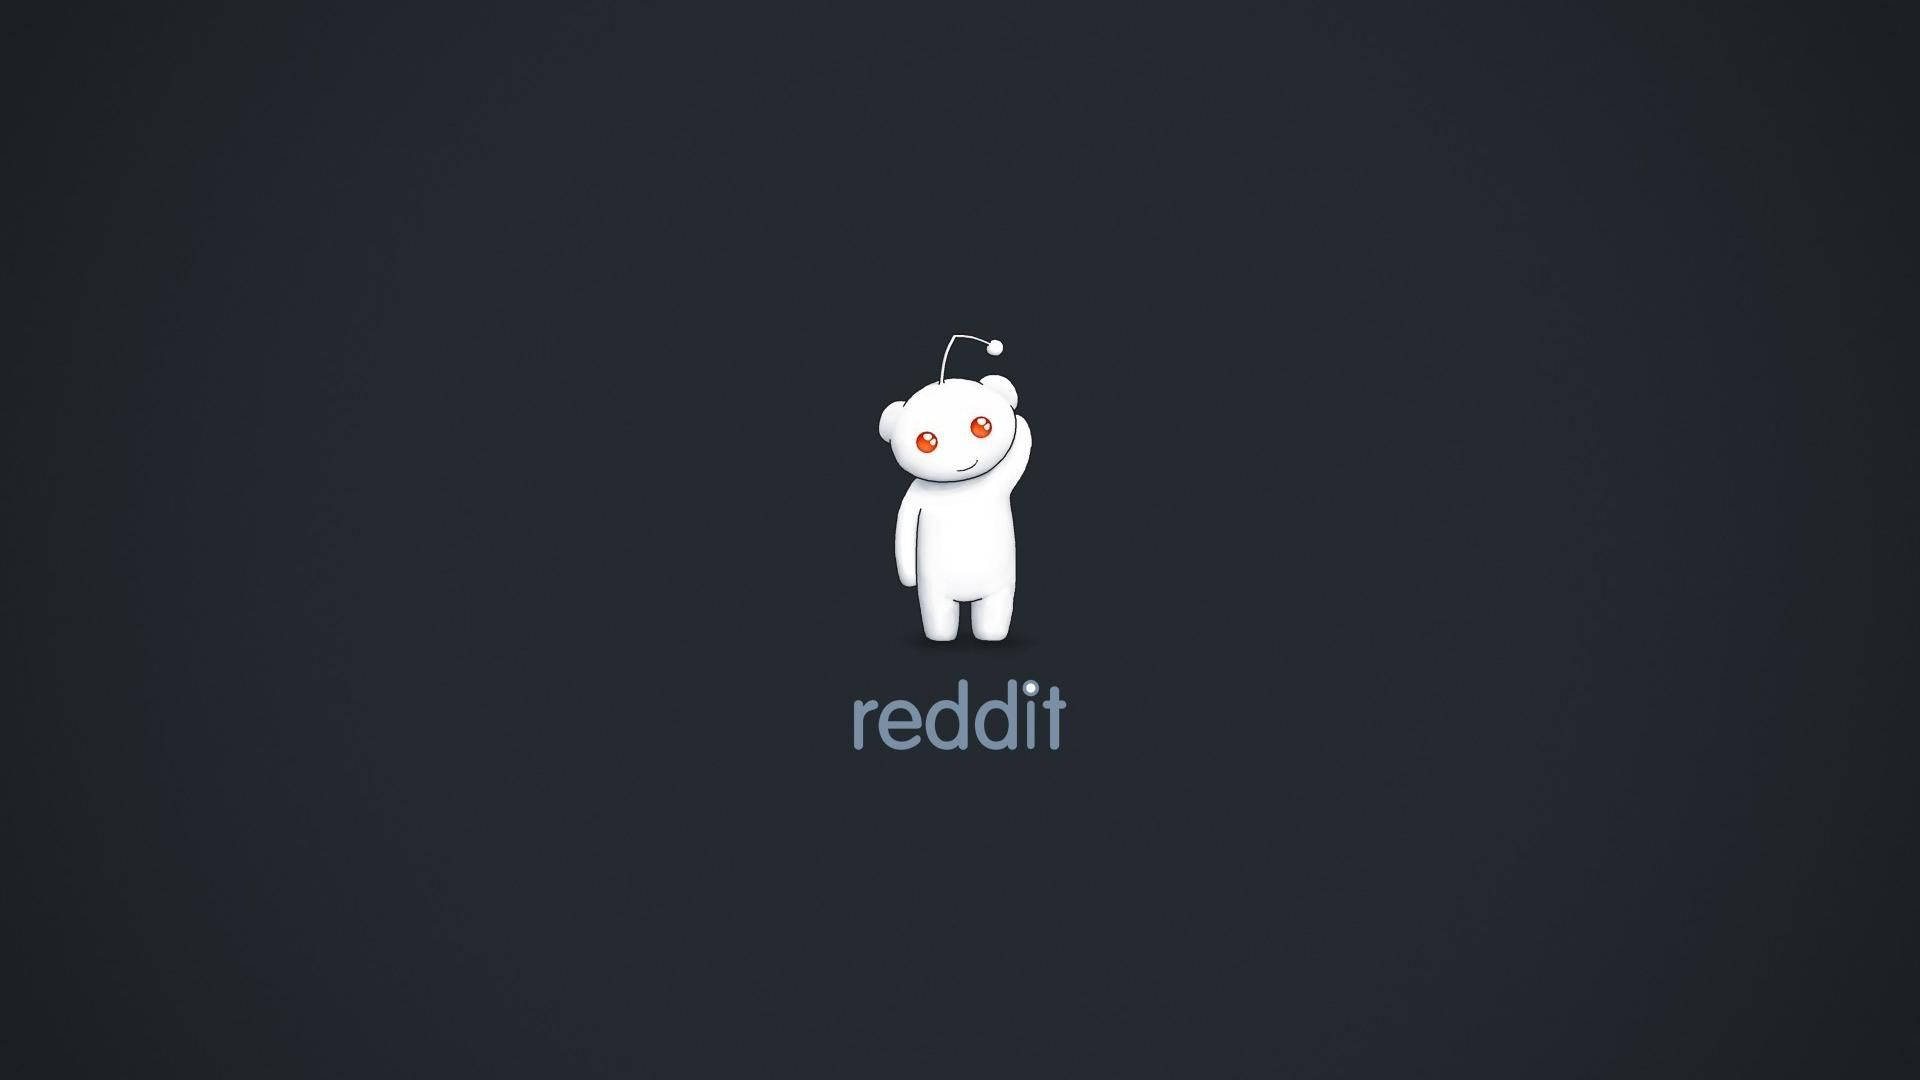 Reddit 1920X1080 Wallpaper and Background Image